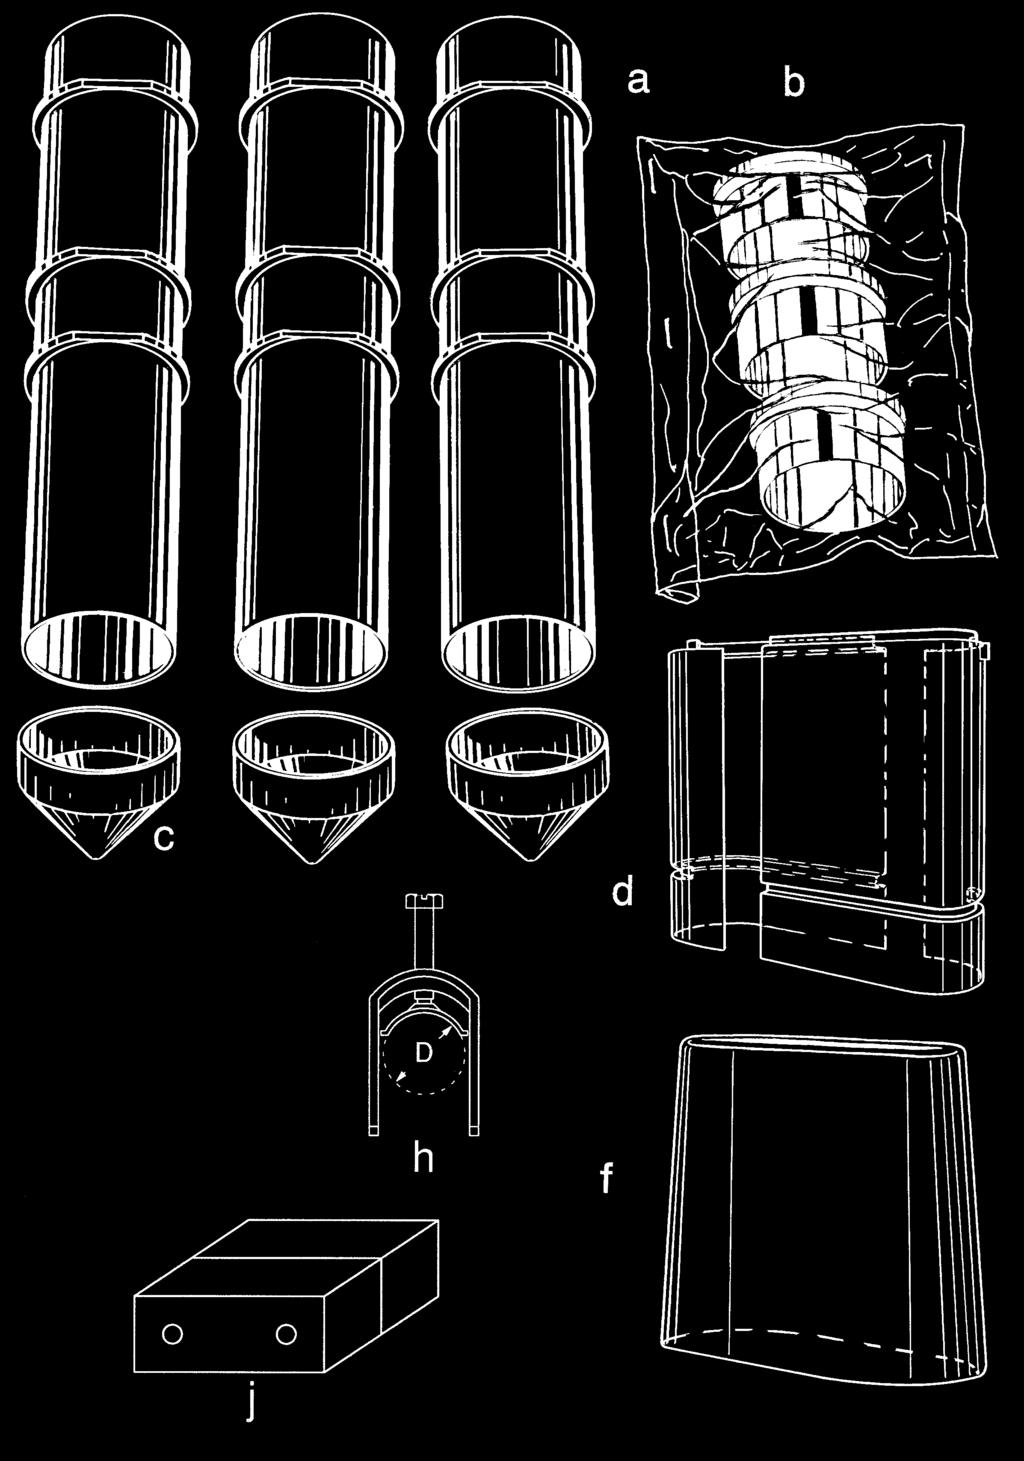 Required materials (figures 1, 2a and 2b) 2a Three insulating conduits (a) One bag containing three greased rubber sleeves (b) Three sealing plugs (c) Two protective sheath halves (d) Three pilot